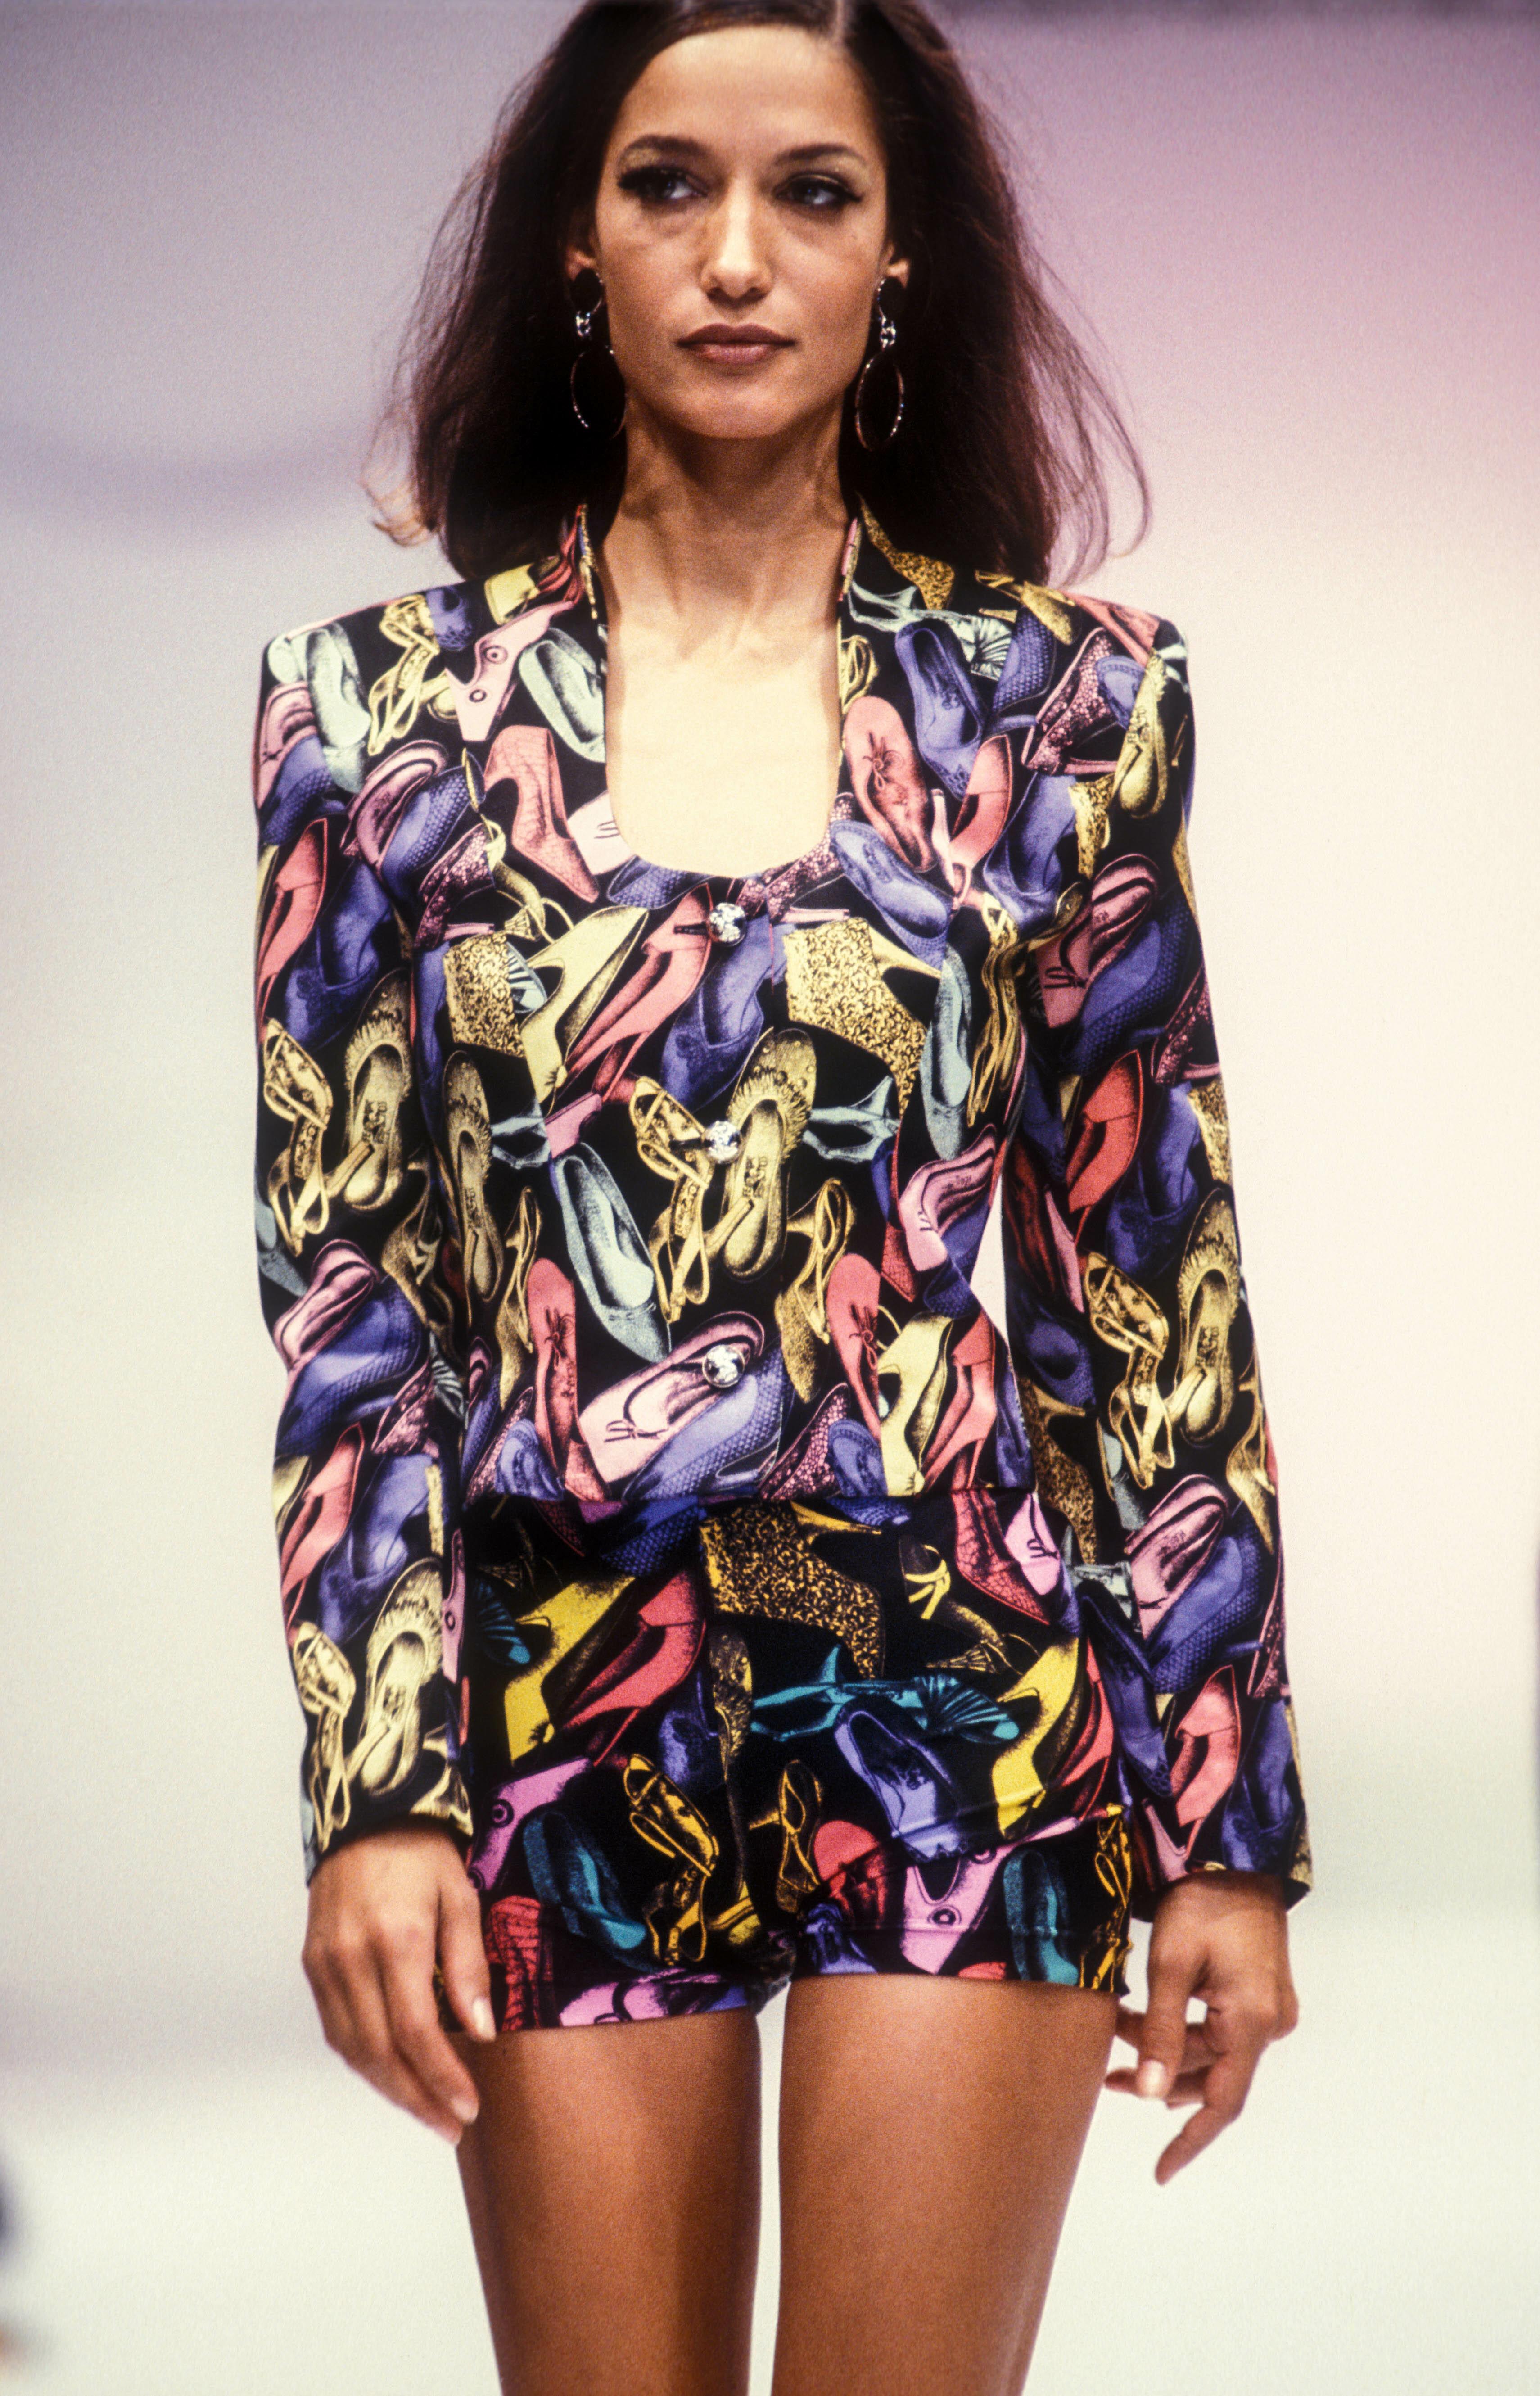 Presenting an incredible multicolor shoe print Salvatore Ferragamo blazer. From the Spring/Summer 1991 collection, this print debuted on the season's runway, was used in the season's ad campaign, and was more recently worn by Kendall Jenner. This